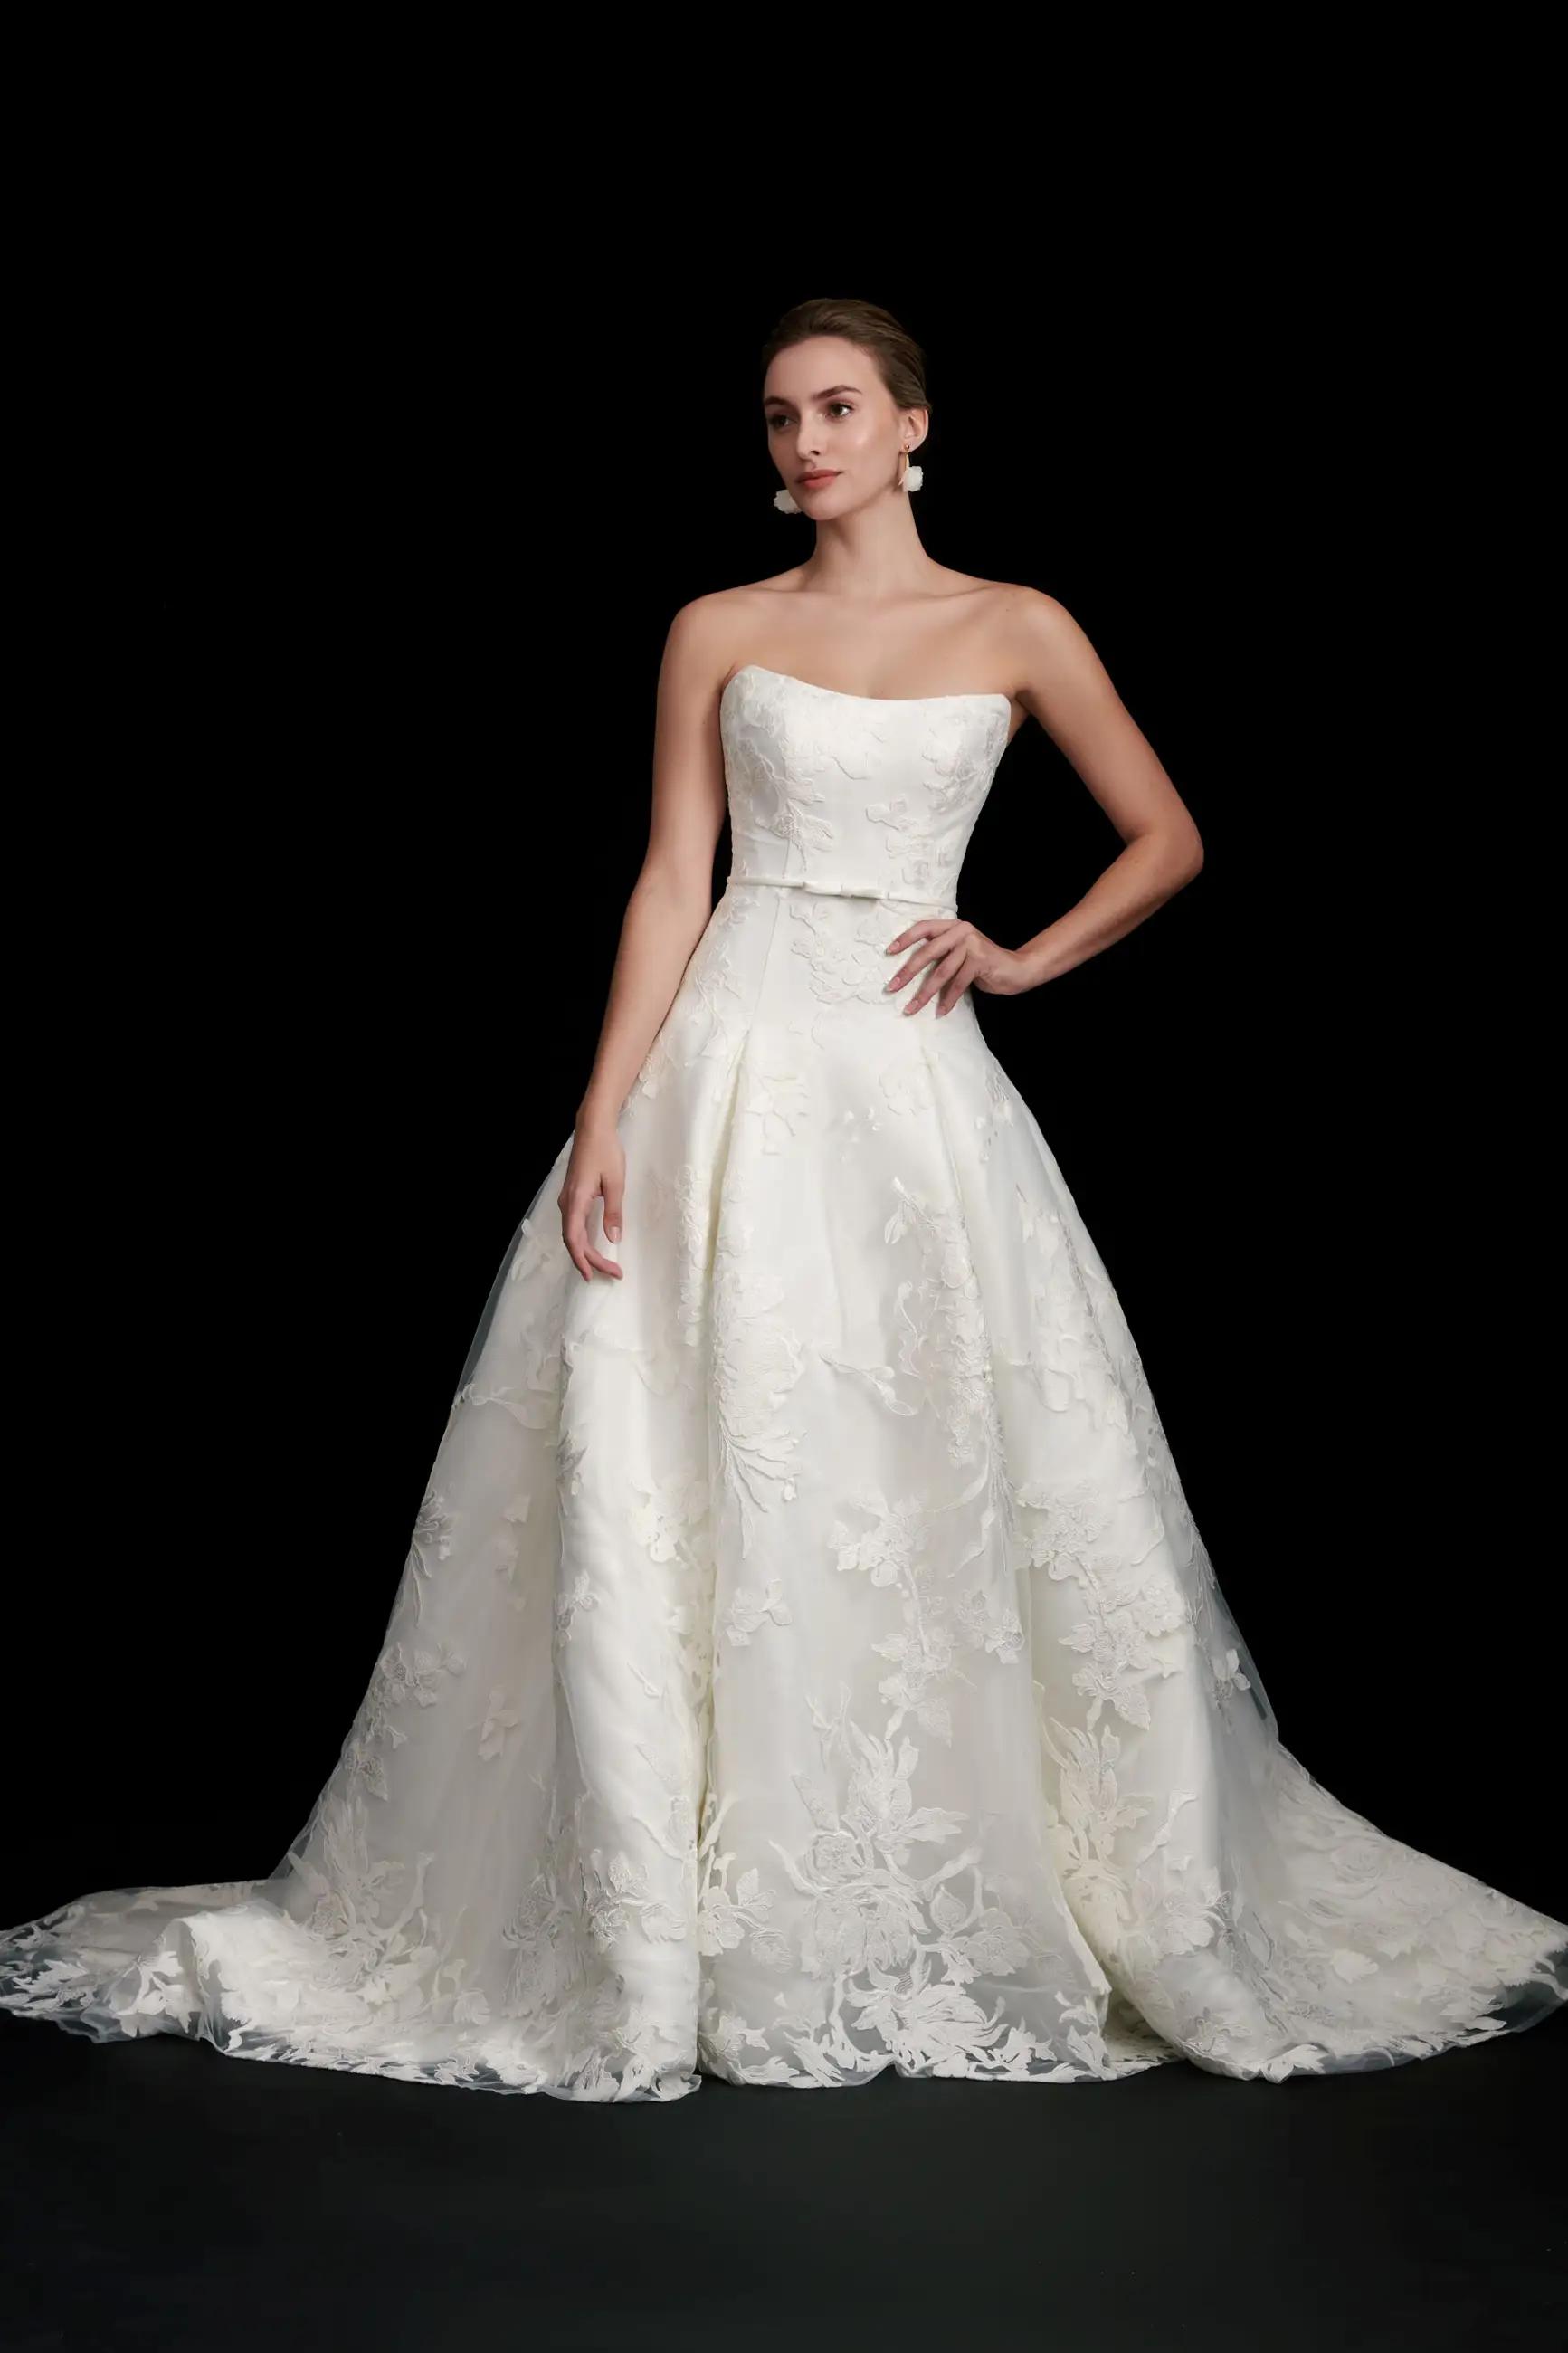 Greer wedding dress by Kelly Faetanin with strapless neckline and drop waist, lace Mikado skirt